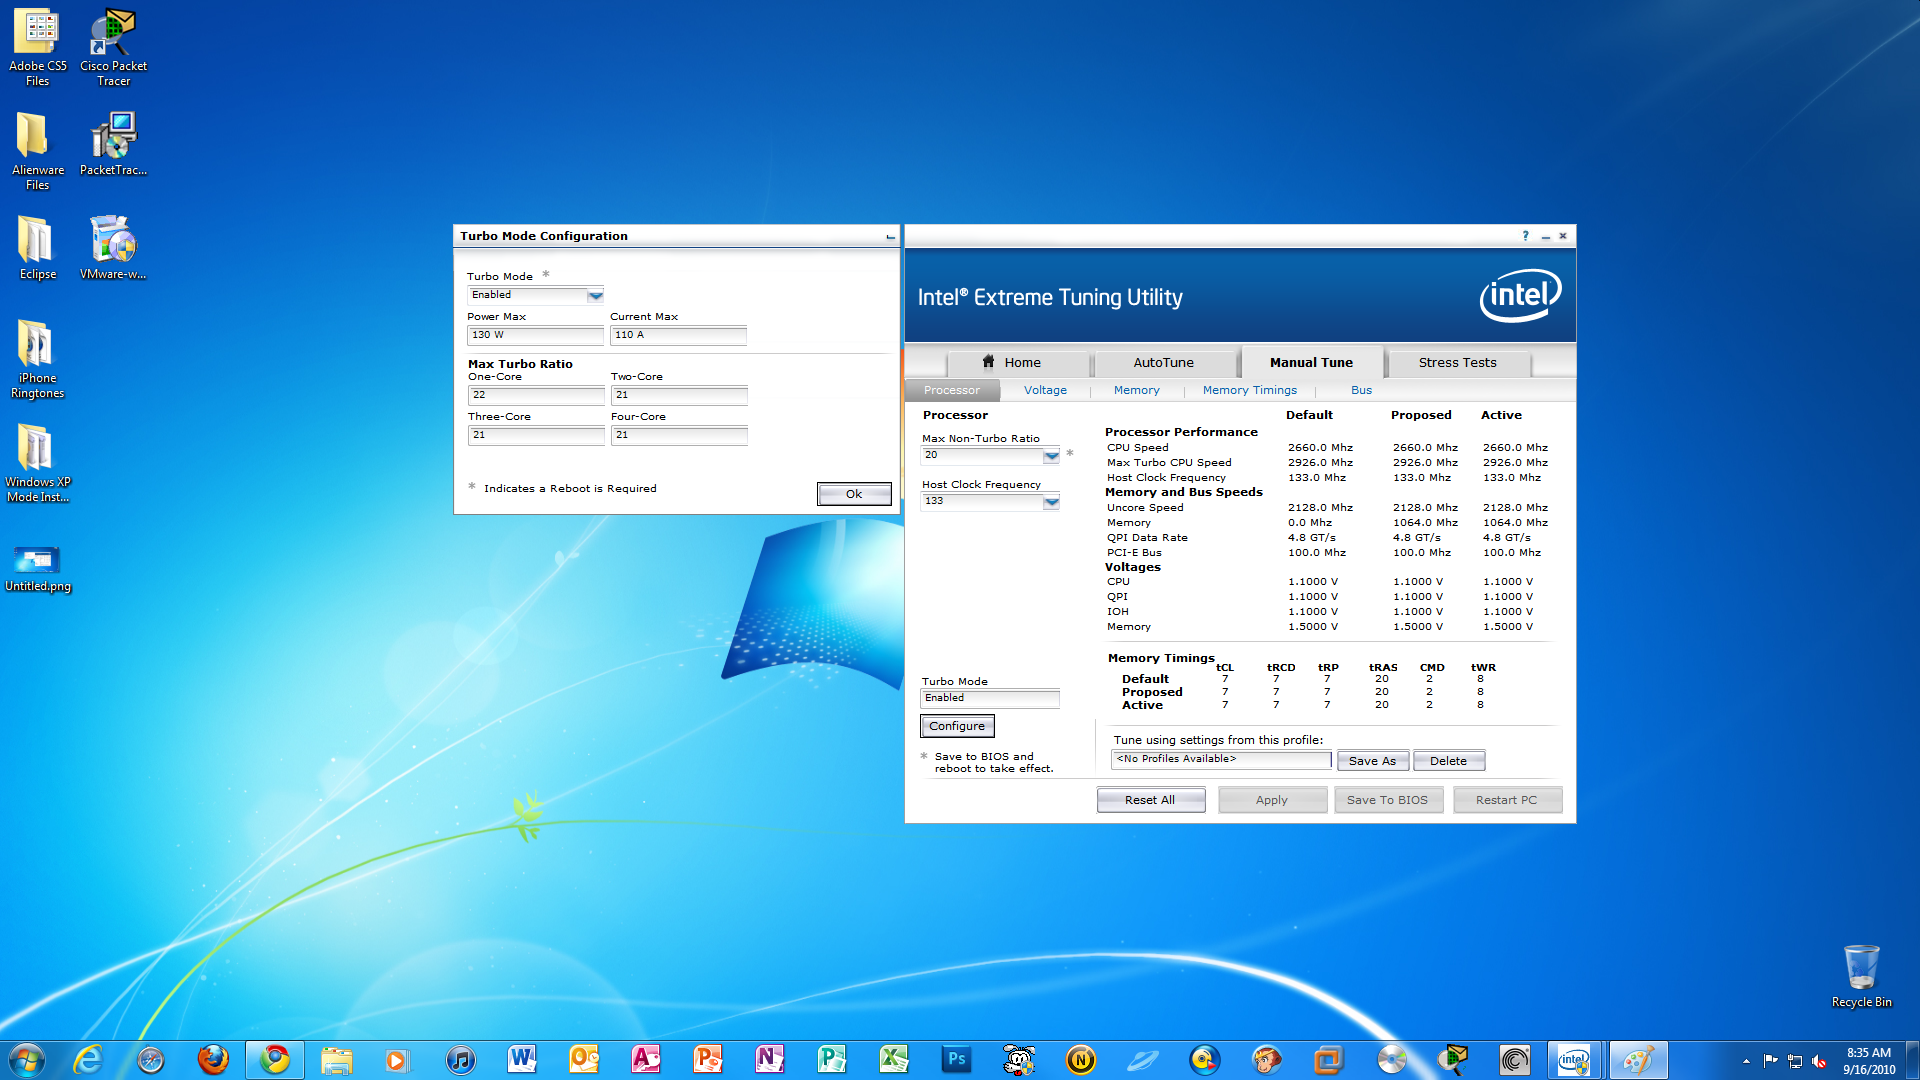 Intel Extreme Tuning Utility 7.12.0.29 free instals